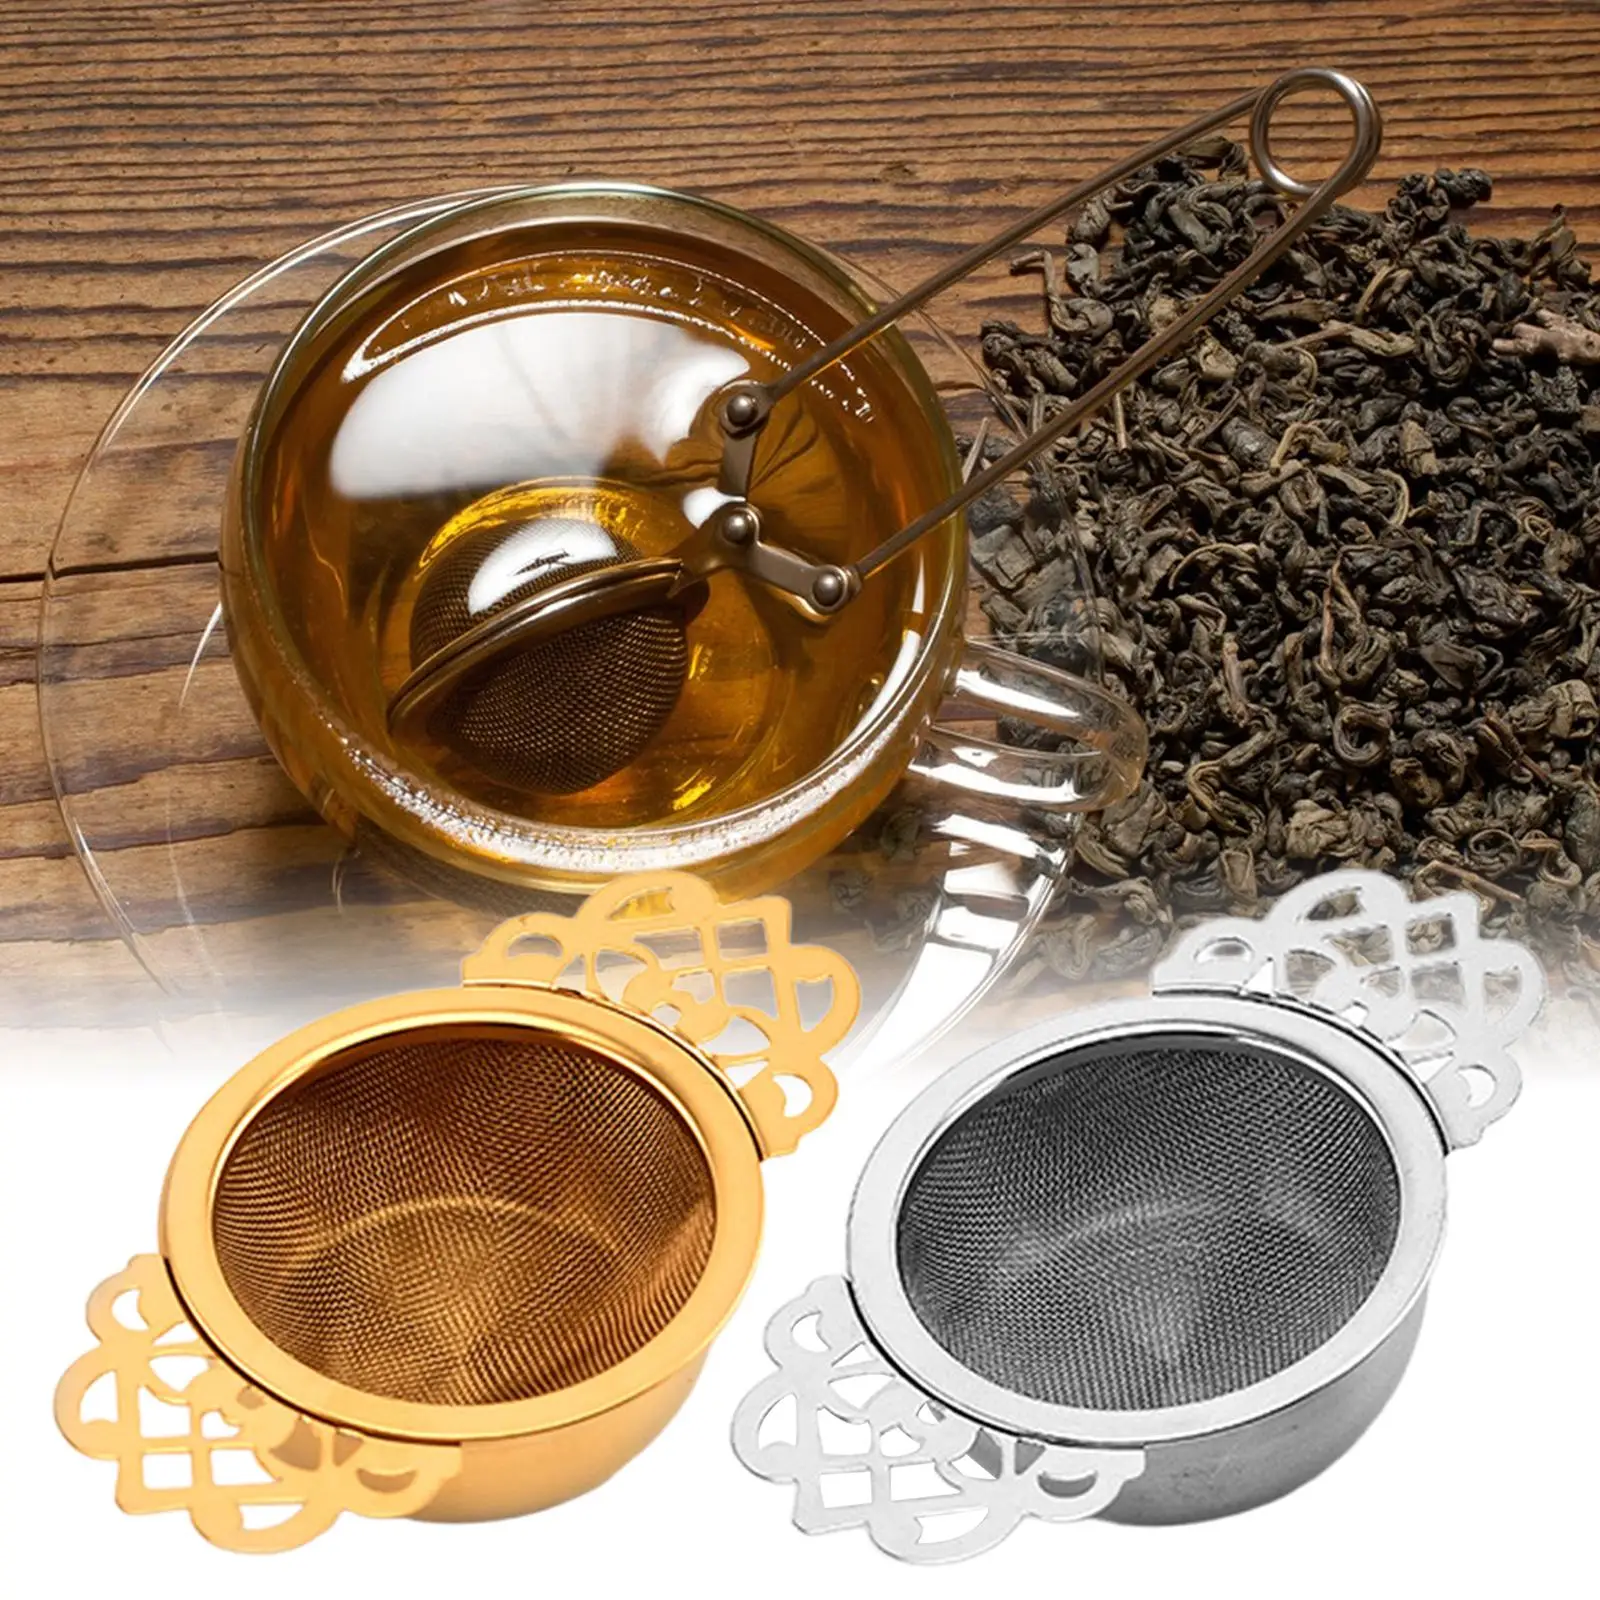 Tea Infuser with Drip Bowl Stainless Steel Tea Strainer for Loose Leaf